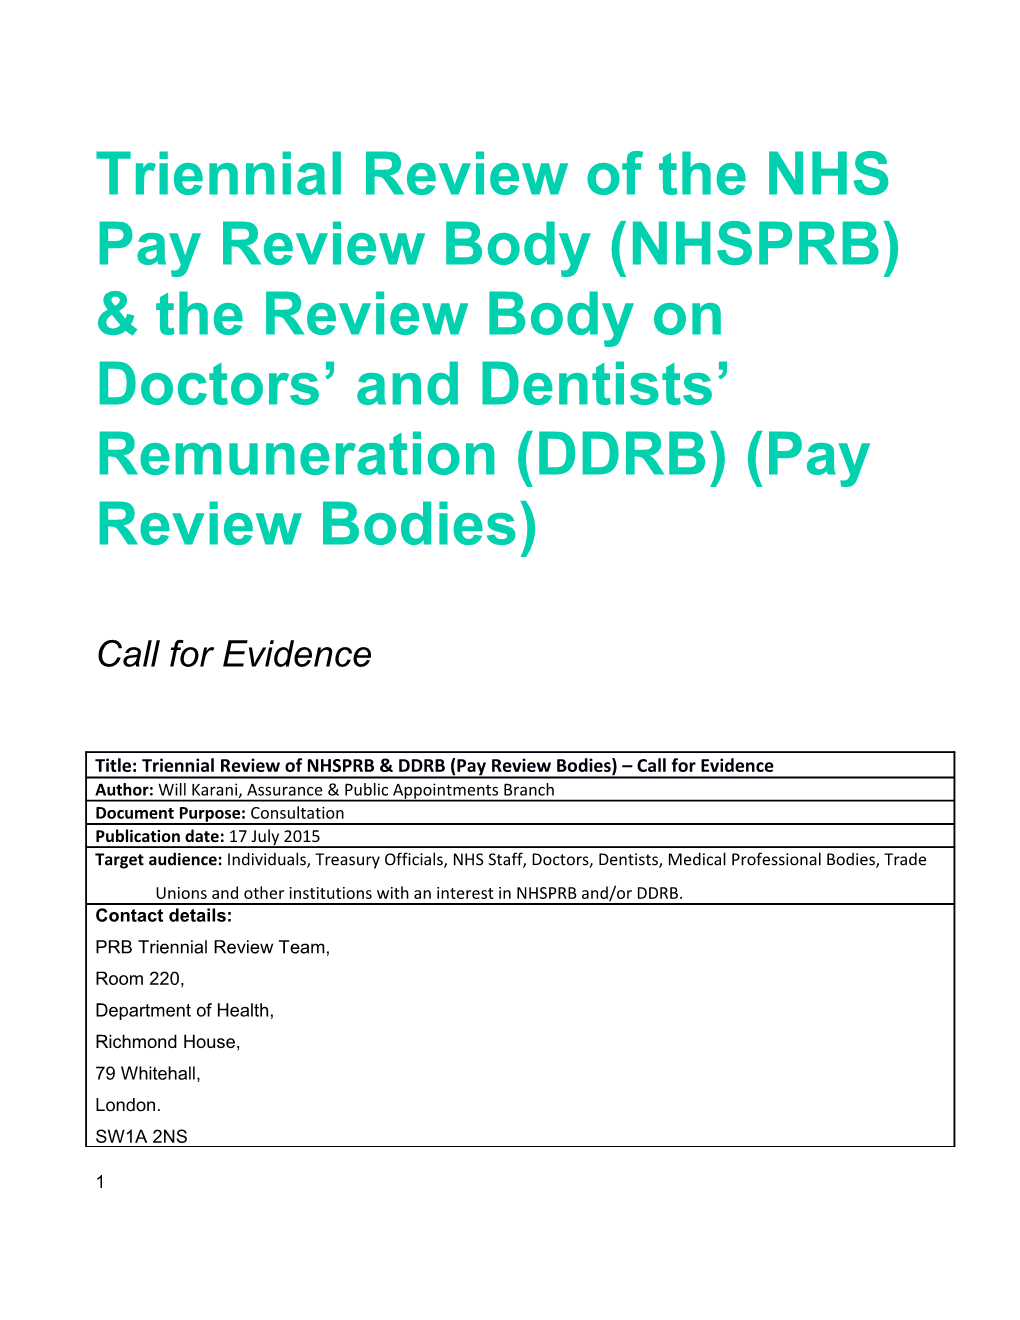 Triennial Review of Medicines and Healthcare Products Regulatory Agency - Call for Evidence